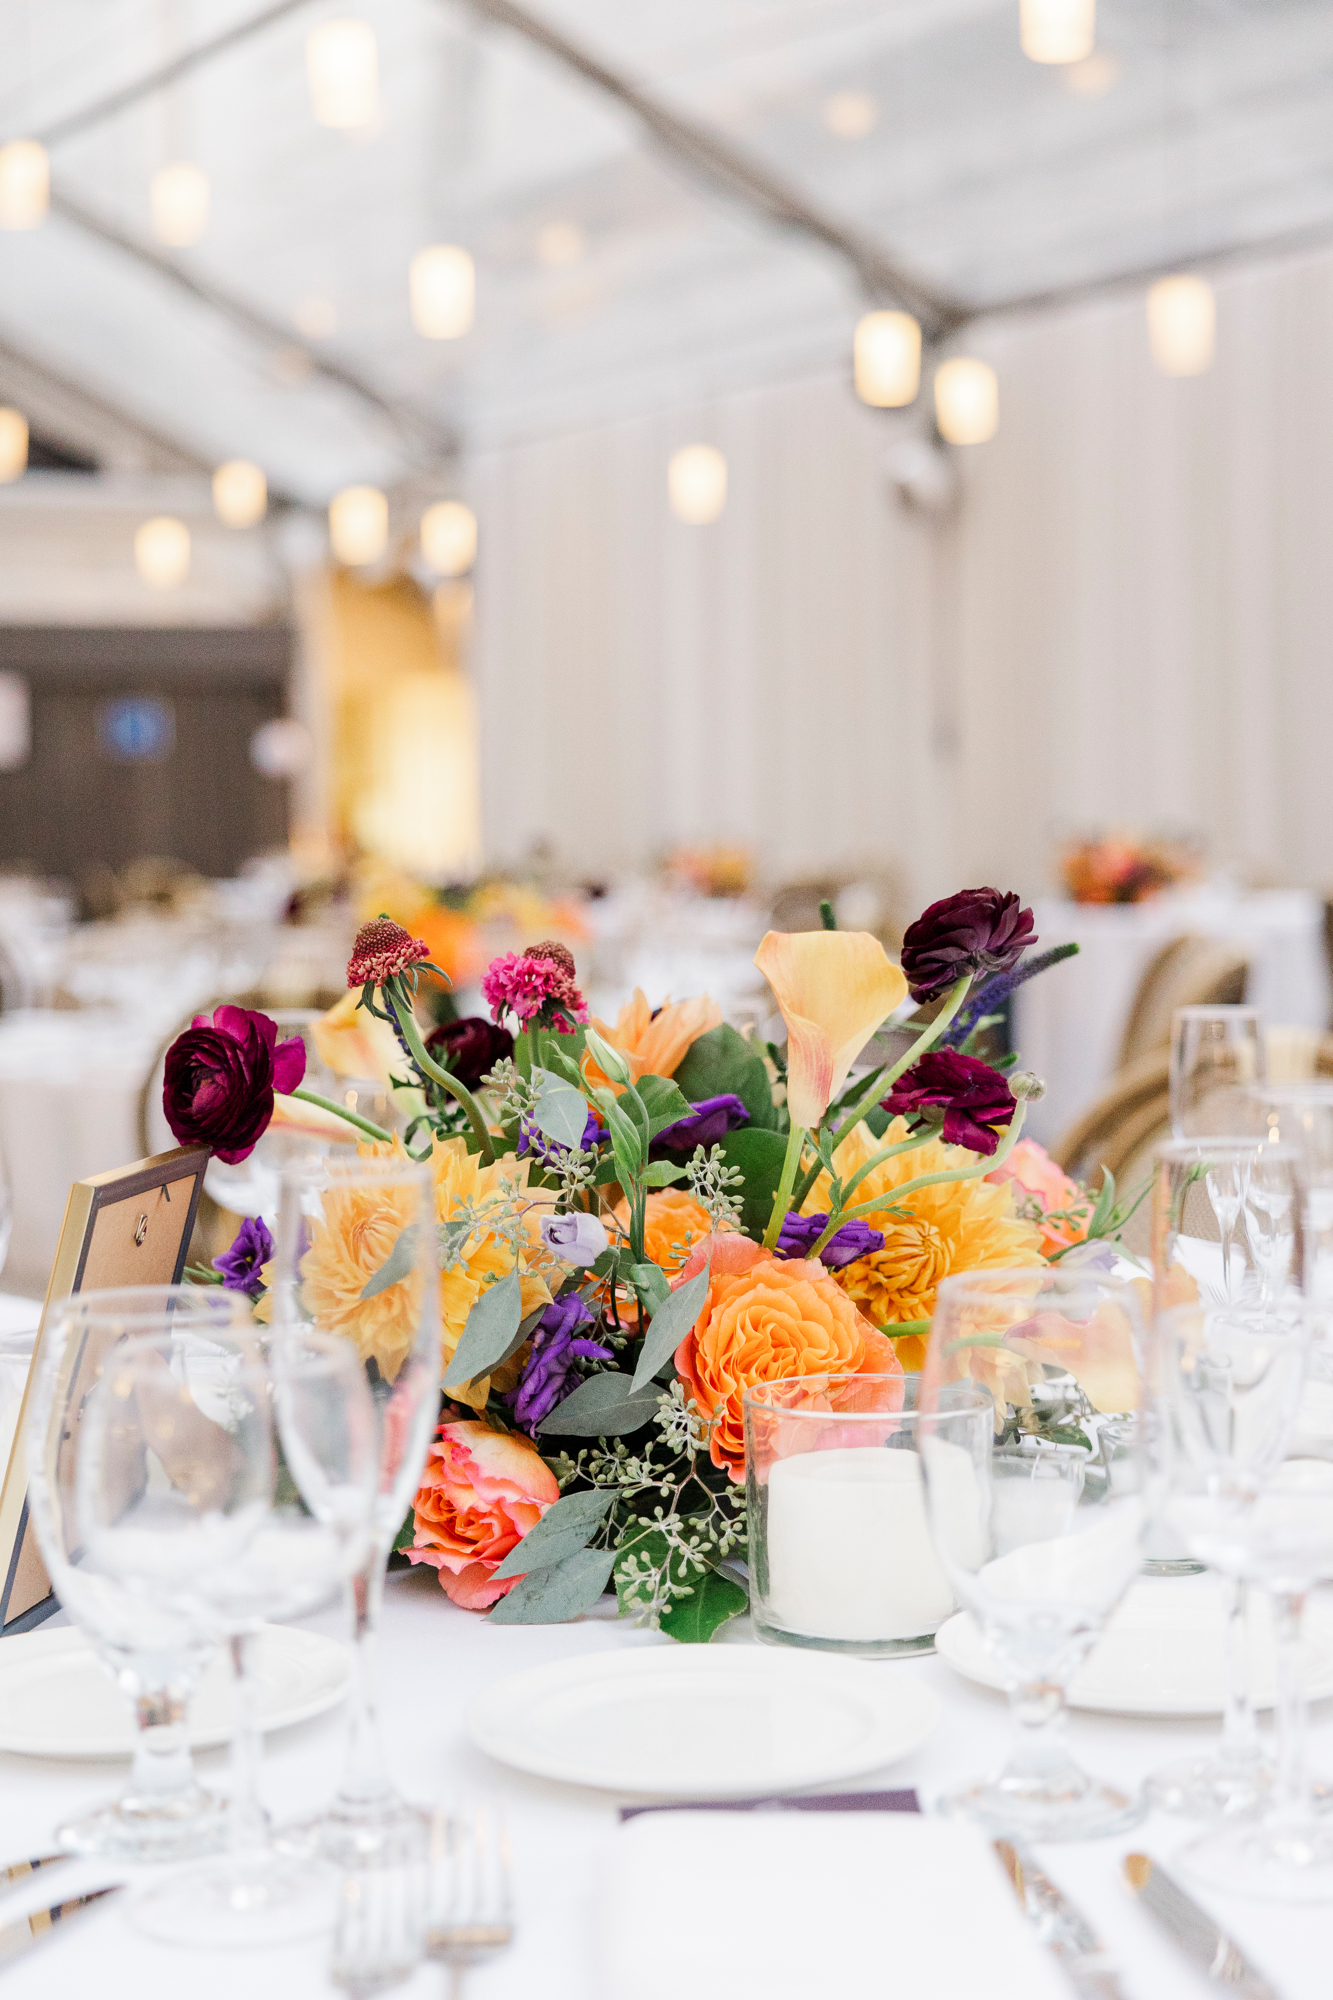 Amazing Bryant Park Grill Wedding in Fall